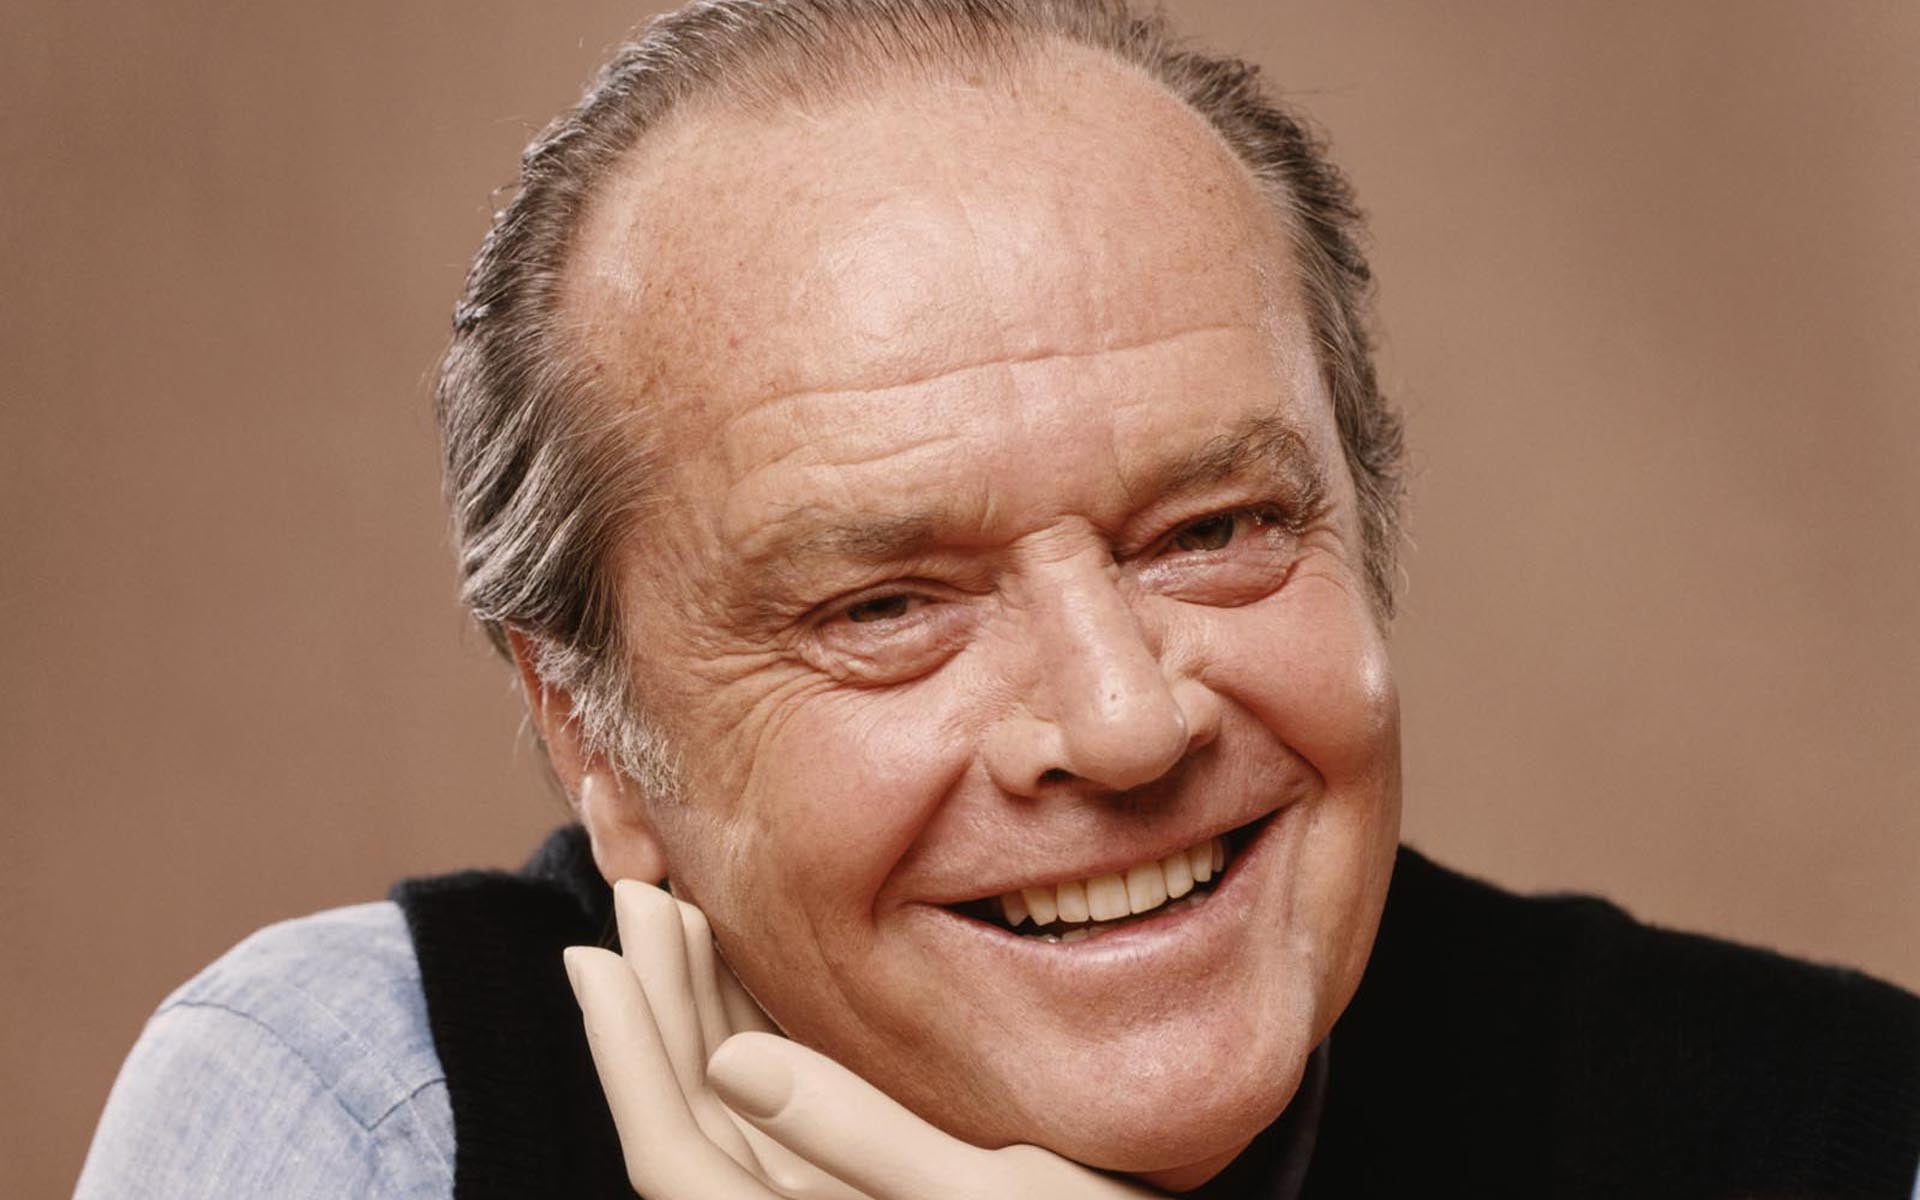 man in black and gray shirt smiling holding his face